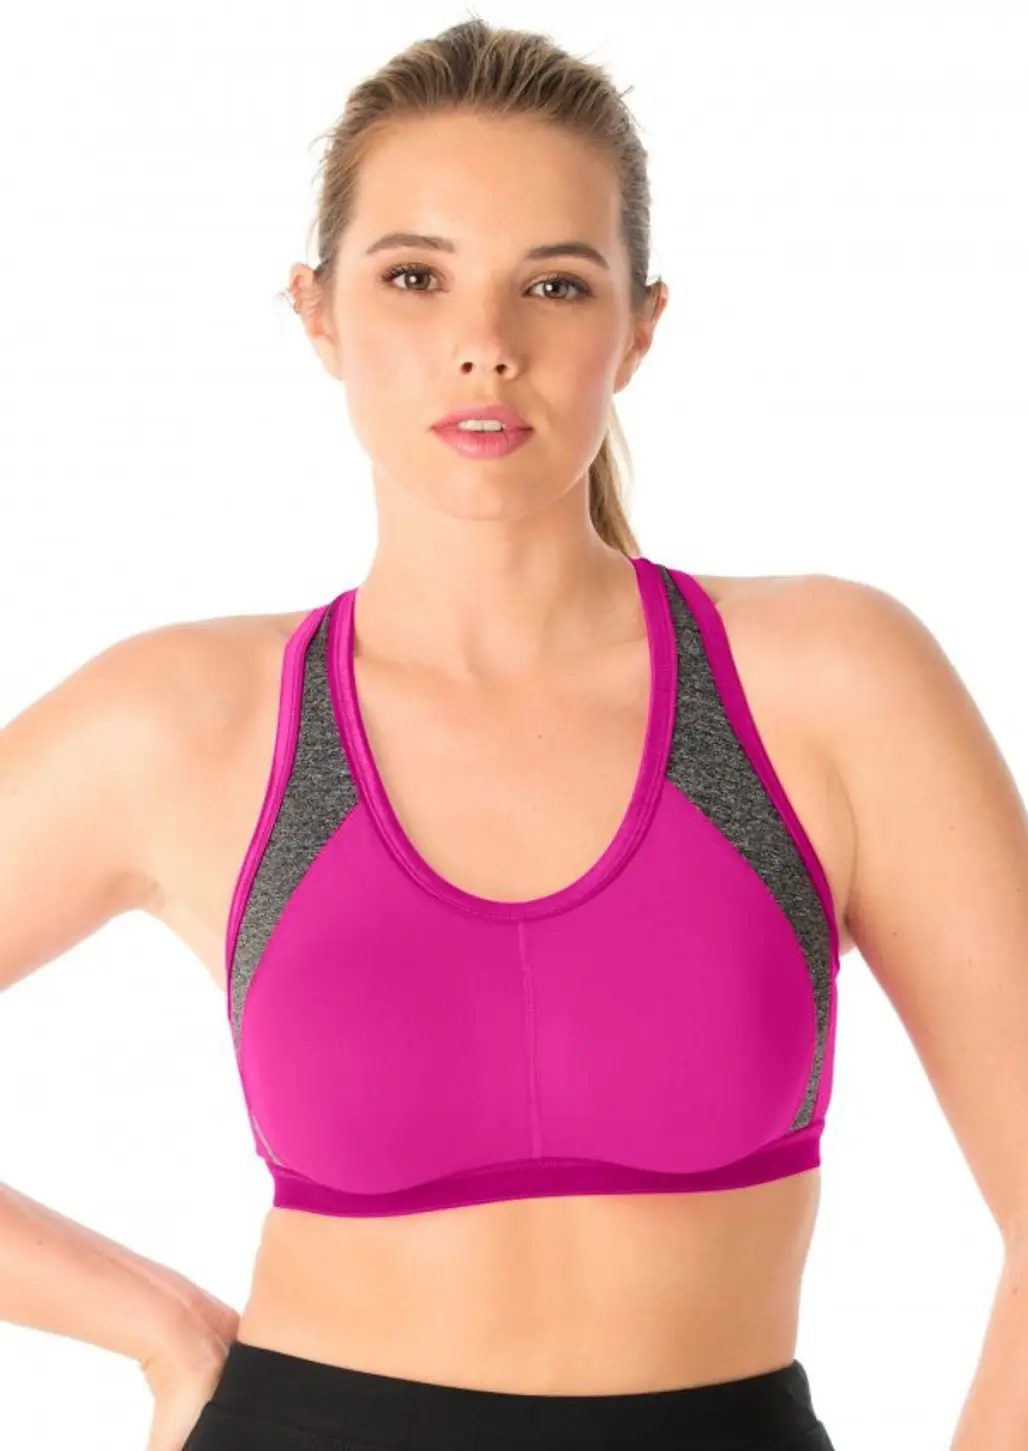 17 Pieces of Fitness Gear to Help Curvy Girls Stay Sexy